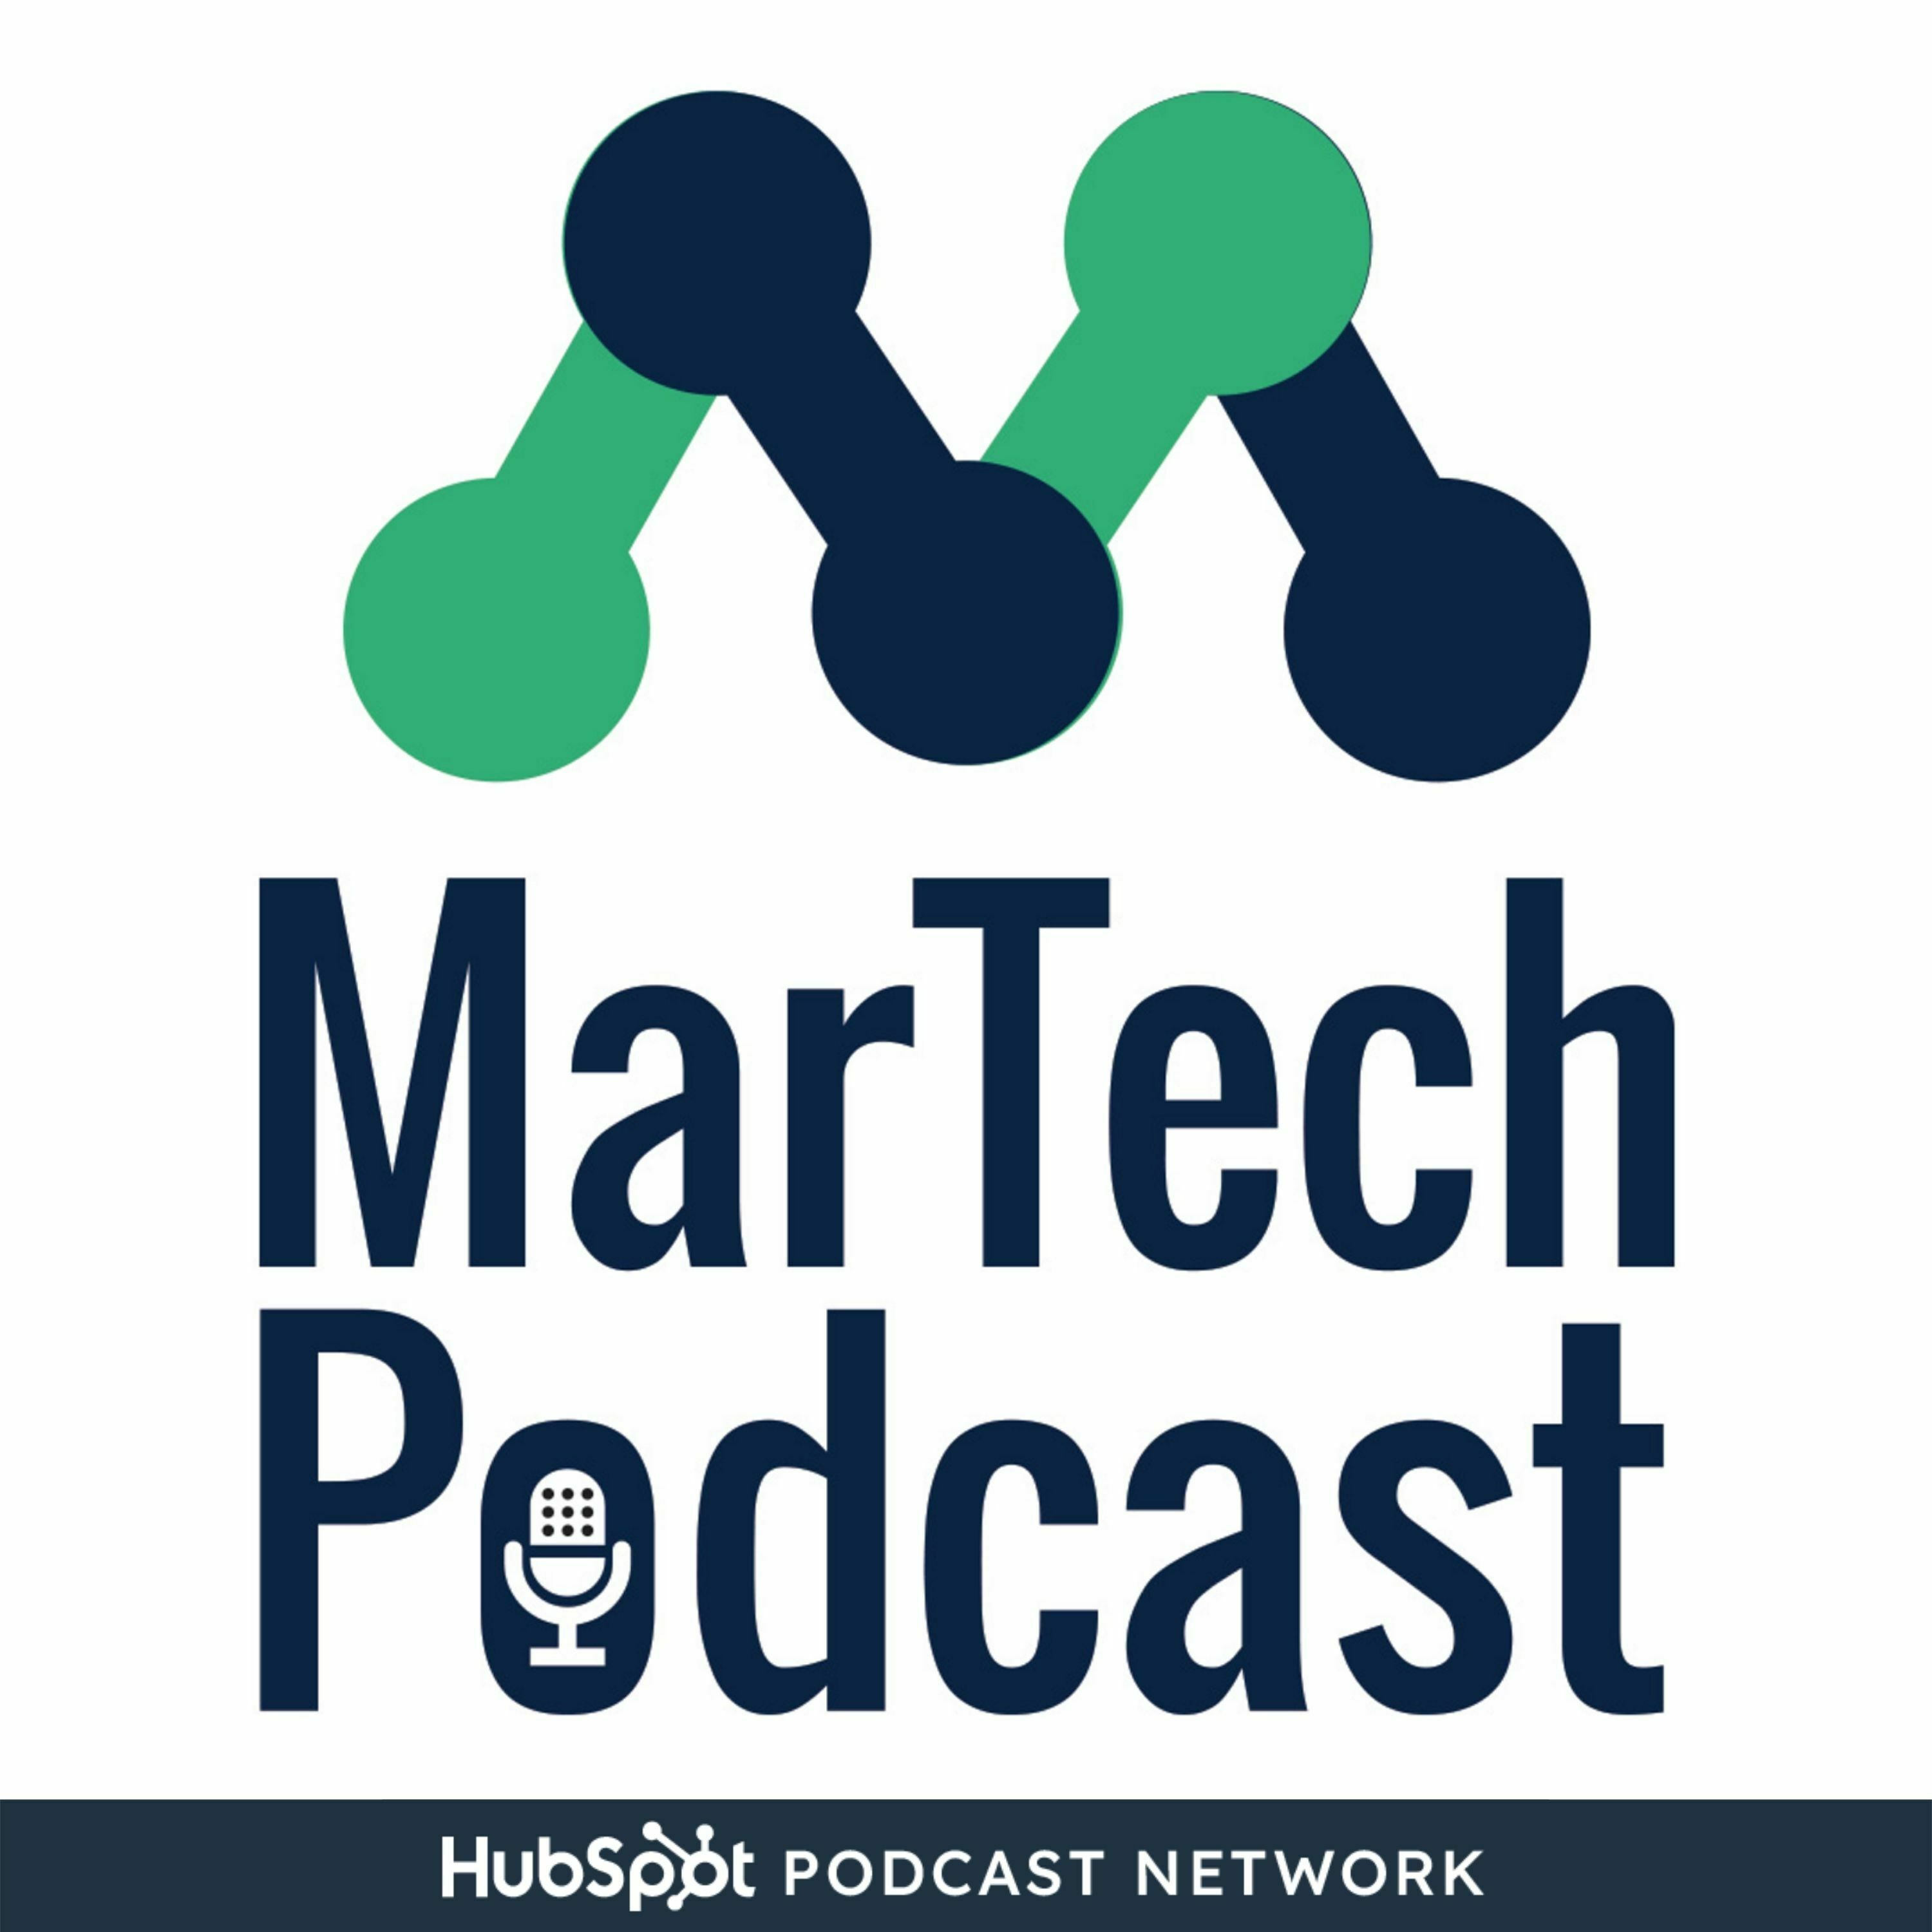 Why I Decided to Give Juan the MarTech Newsletters -- Juan Mendoza // The MarTech Weekly